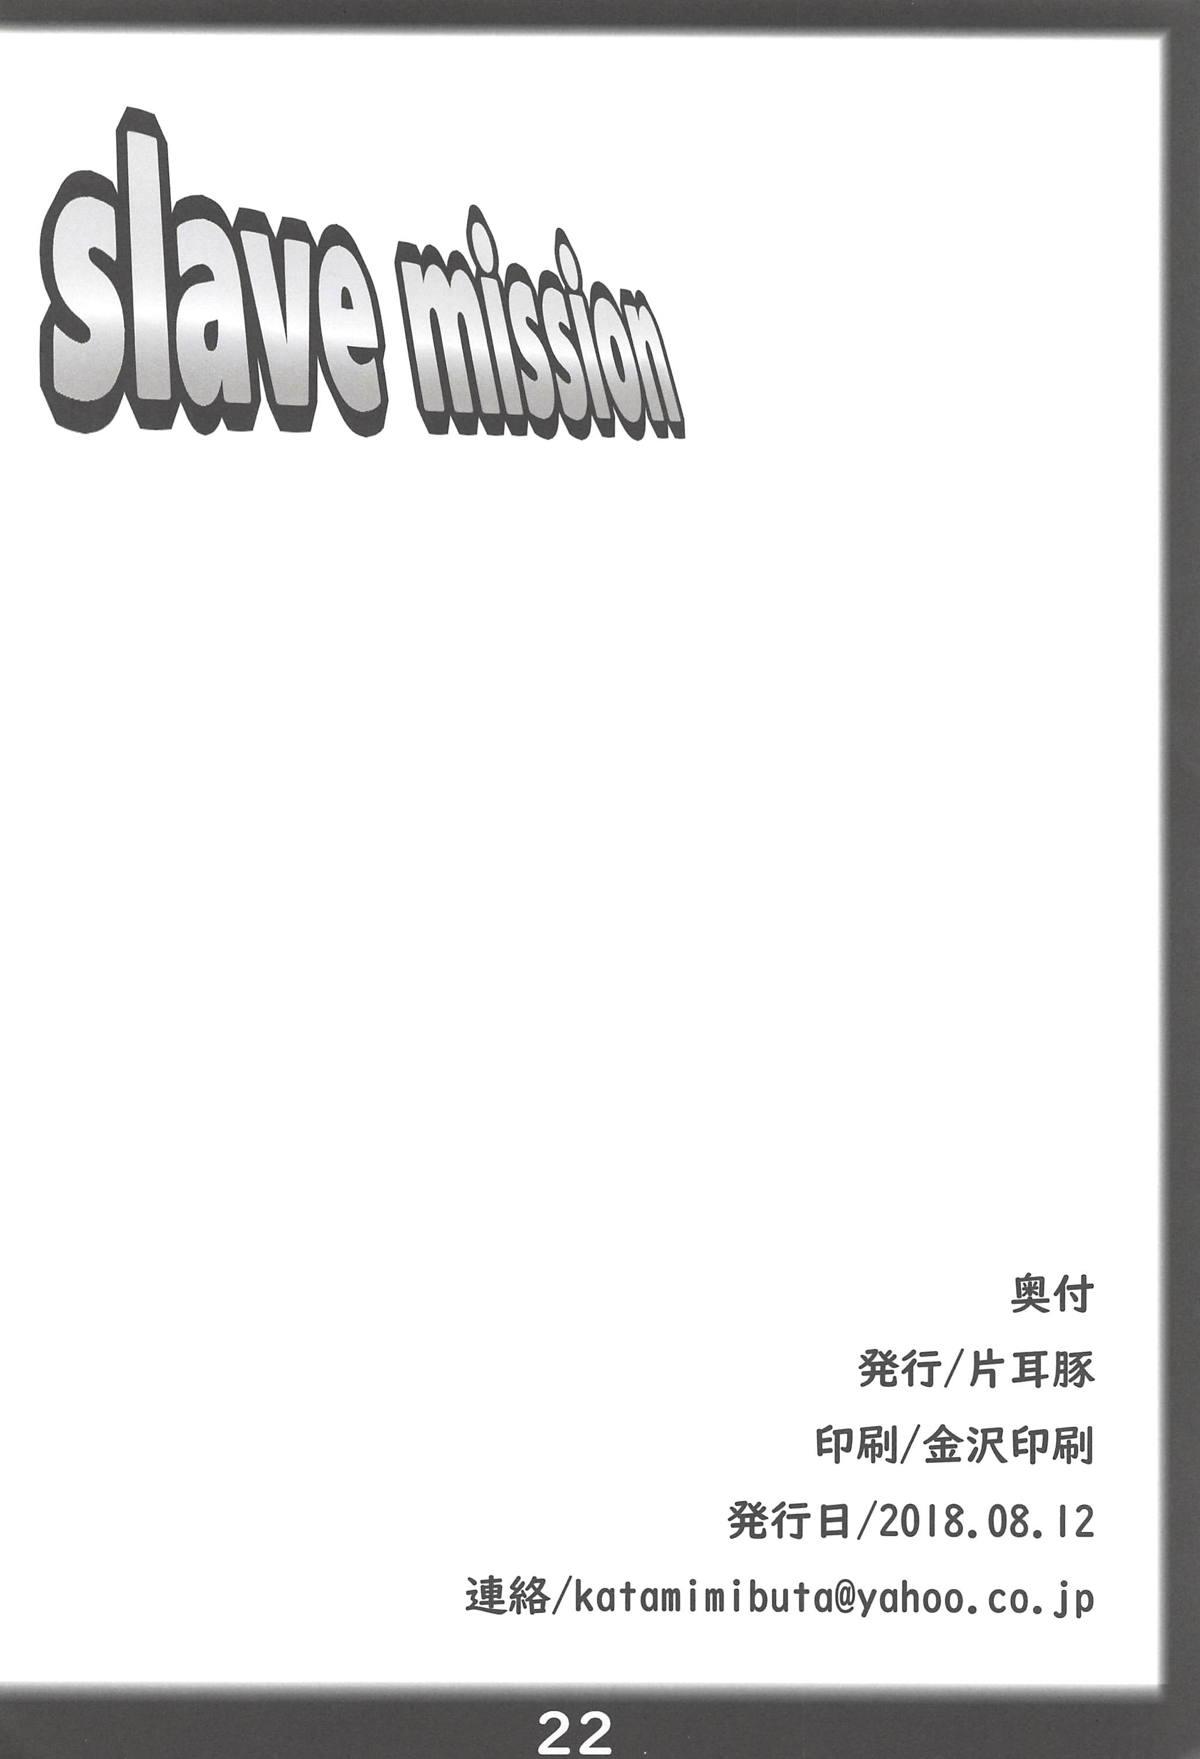 Butthole slave mission - King of fighters Free Blow Job Porn - Page 21